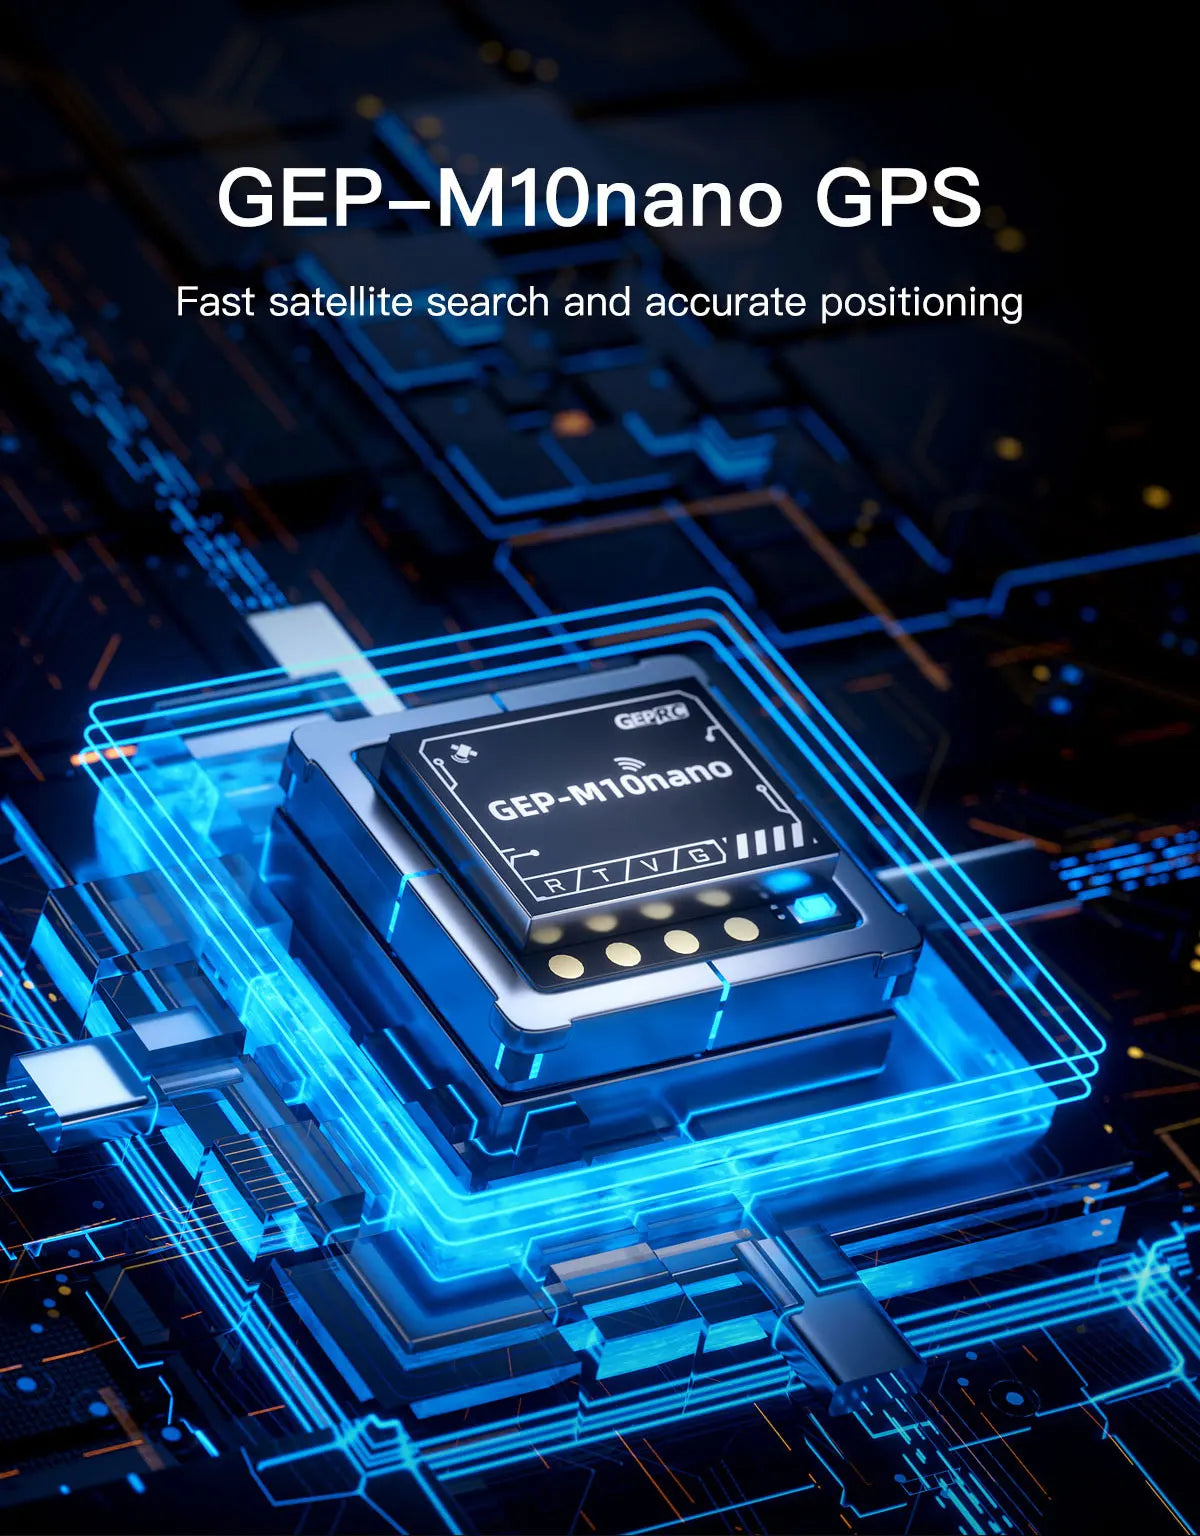 GEPRC Tern-LR40 HD O3 Long Range FPV, GepeG Gep-Mionano GPS Fast satellite search and accurate positioning Ge